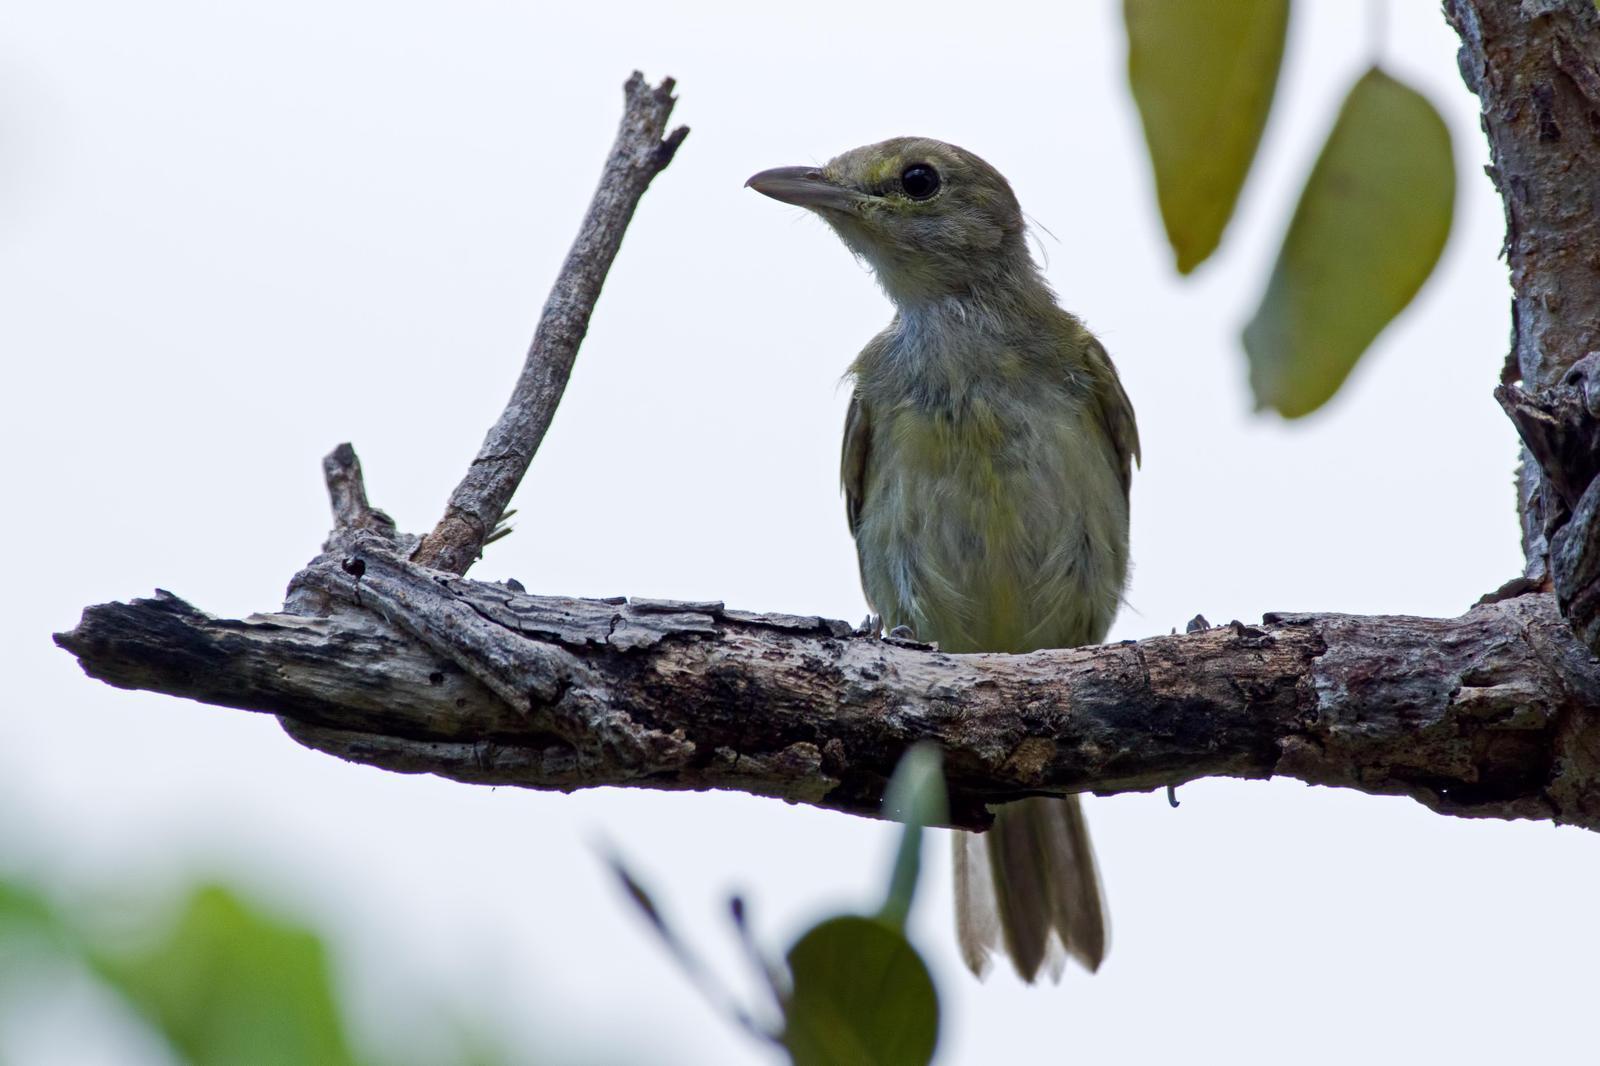 Thick-billed Vireo Photo by Rob Dickerson